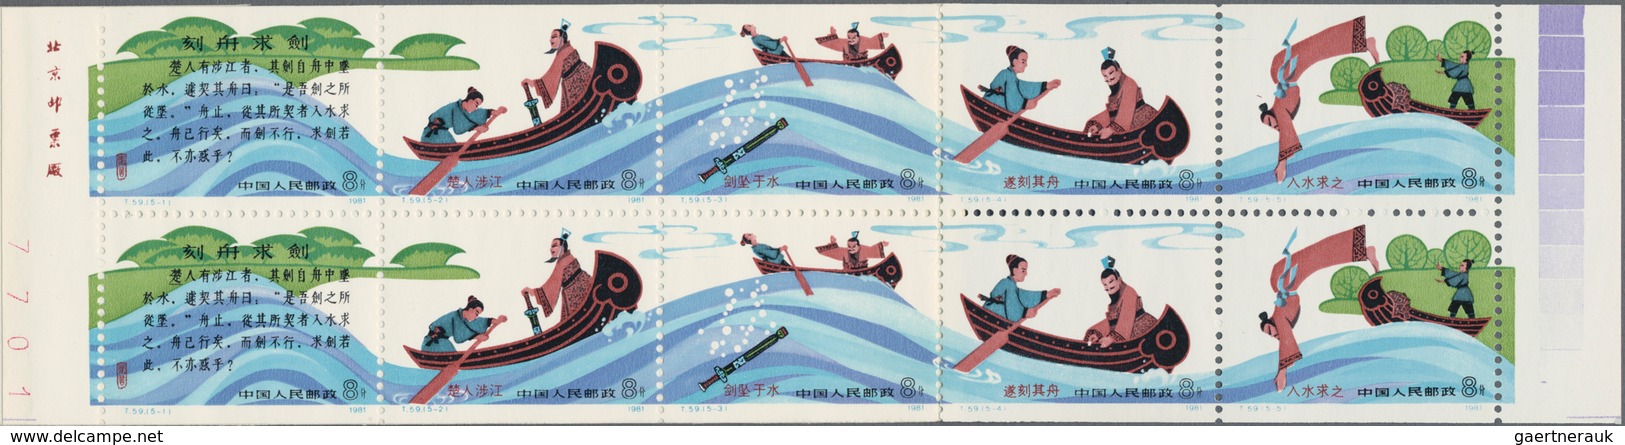 China - Volksrepublik: 1980/81, 3 booklet panes, including the SB2 Chinese River Dolphin, SB3 Year o